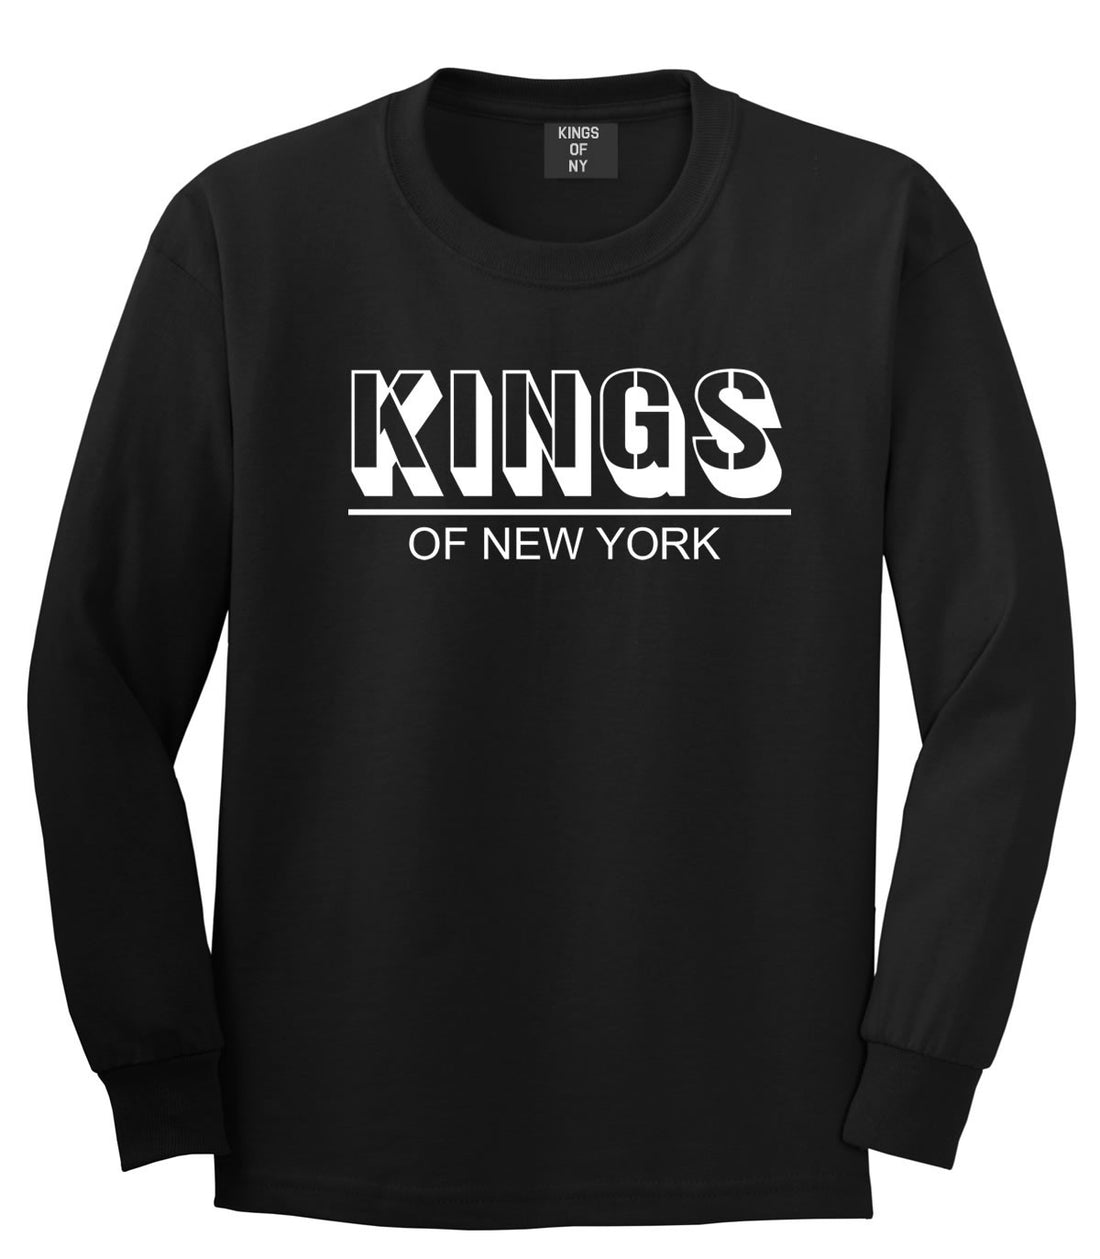 King Branded Block Letters Long Sleeve T-Shirt in Black by Kings Of NY